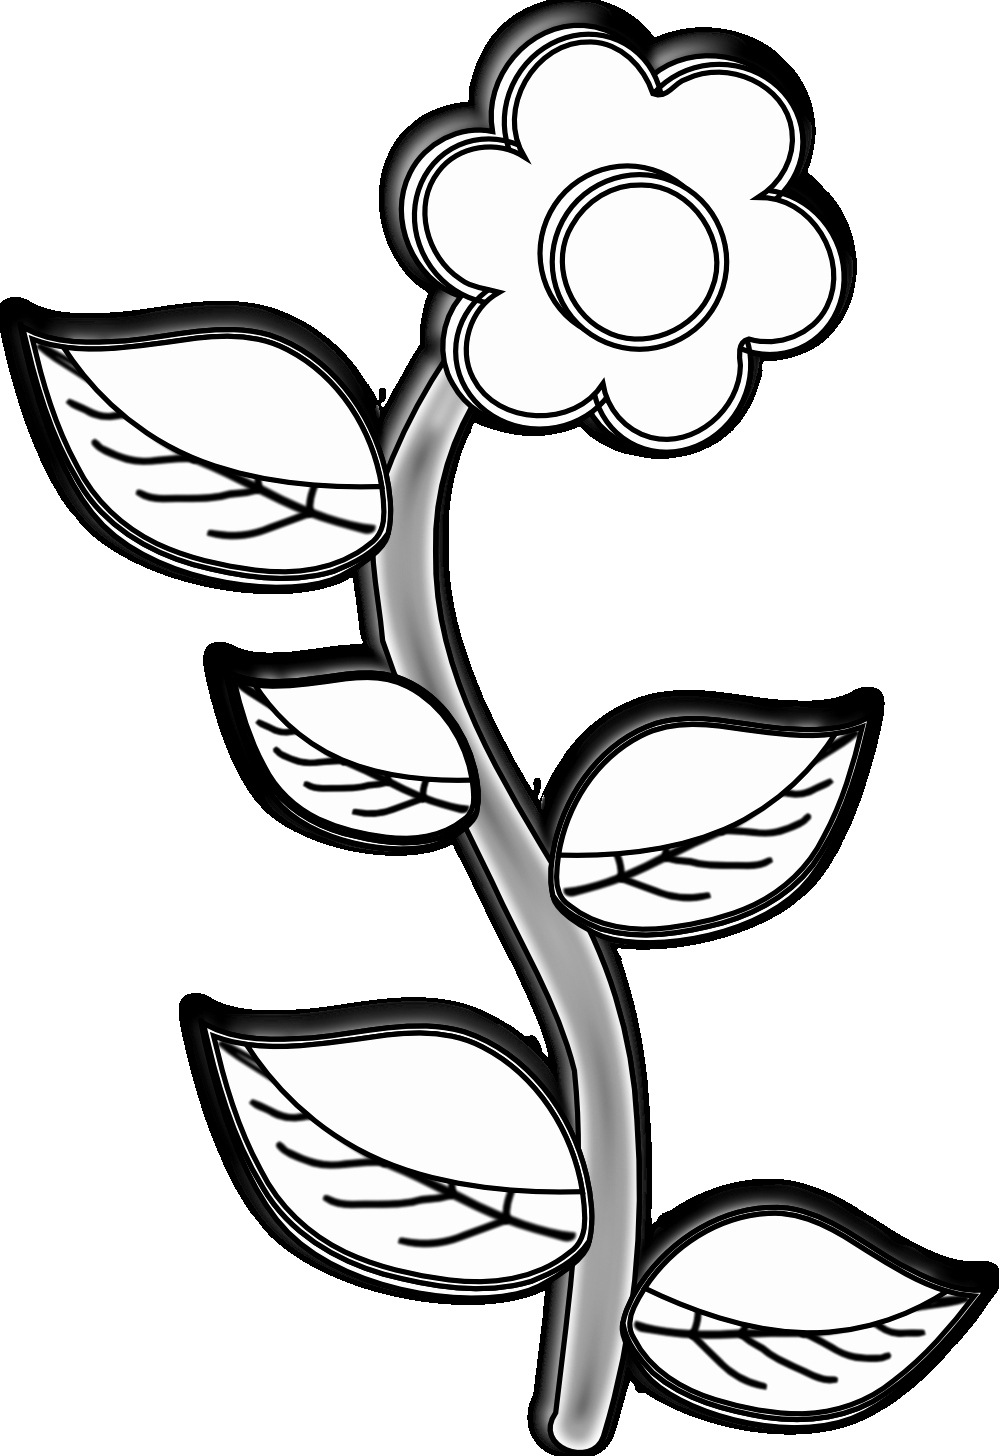 Black and White Flower Drawings Best Of Free Flower Drawings Download Free Clip Art Free Clip Art On Clipart Library